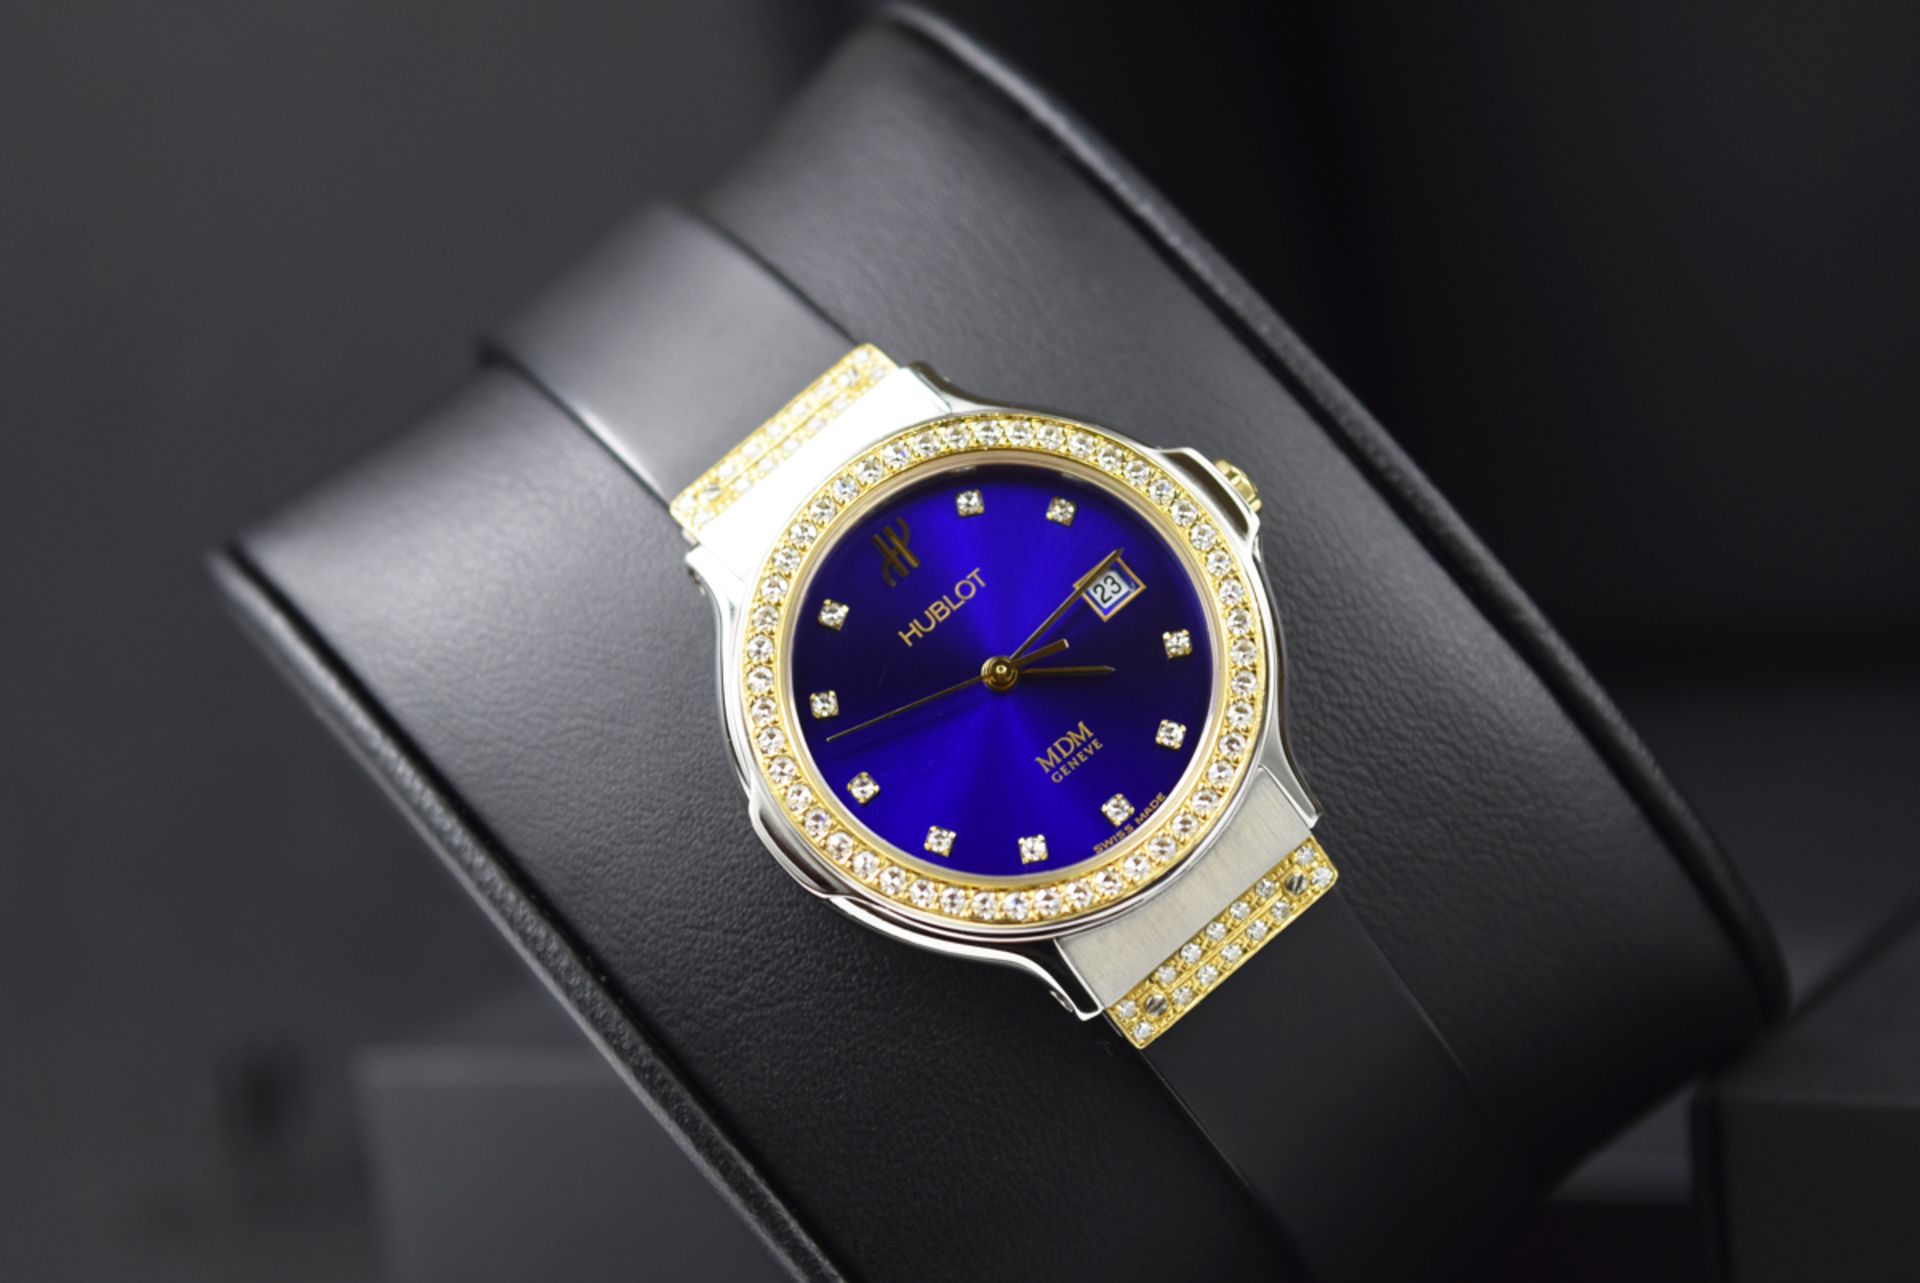 HUBLOT - 'Diamond' Lady Date - Steel and Gold! Gorgeous Blue Dial! - Image 2 of 8